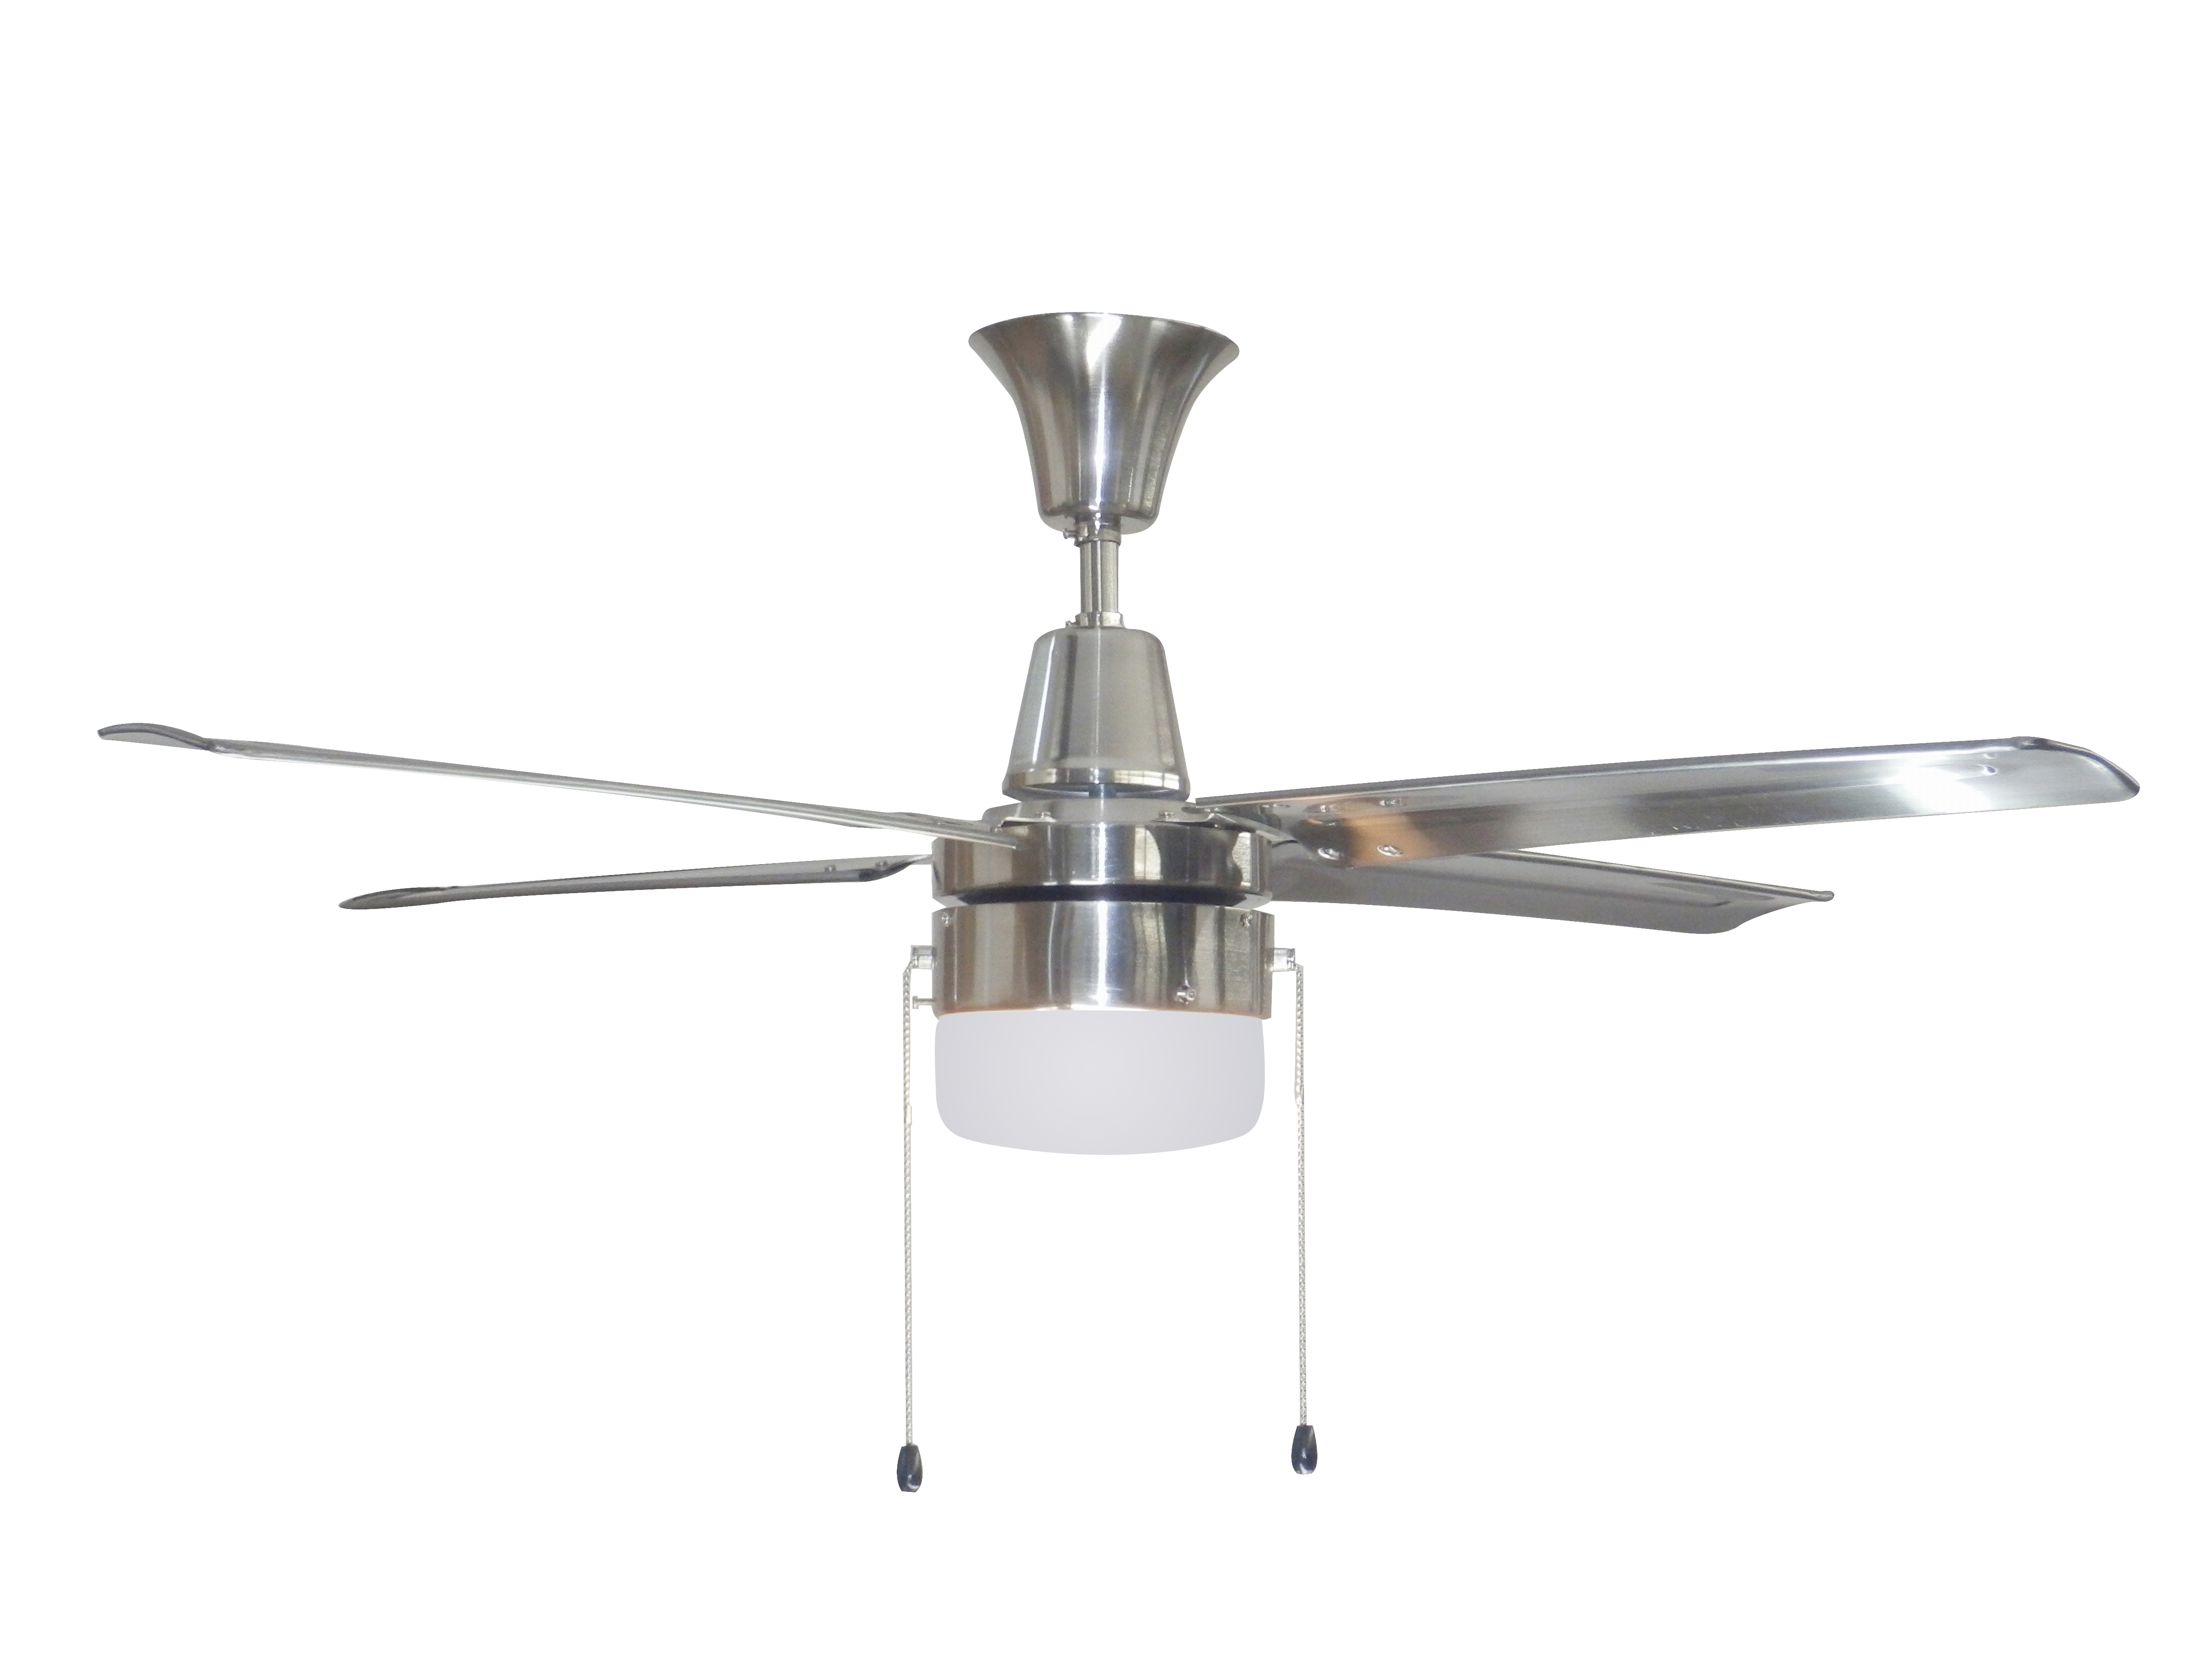 Litex-UB48BC4LE-URBANA - 48 Inch Single Light LED Ceiling Fan   Brushed Chrome Finish with Brushed Chrome Metal Blade Finish with Frosted Glass